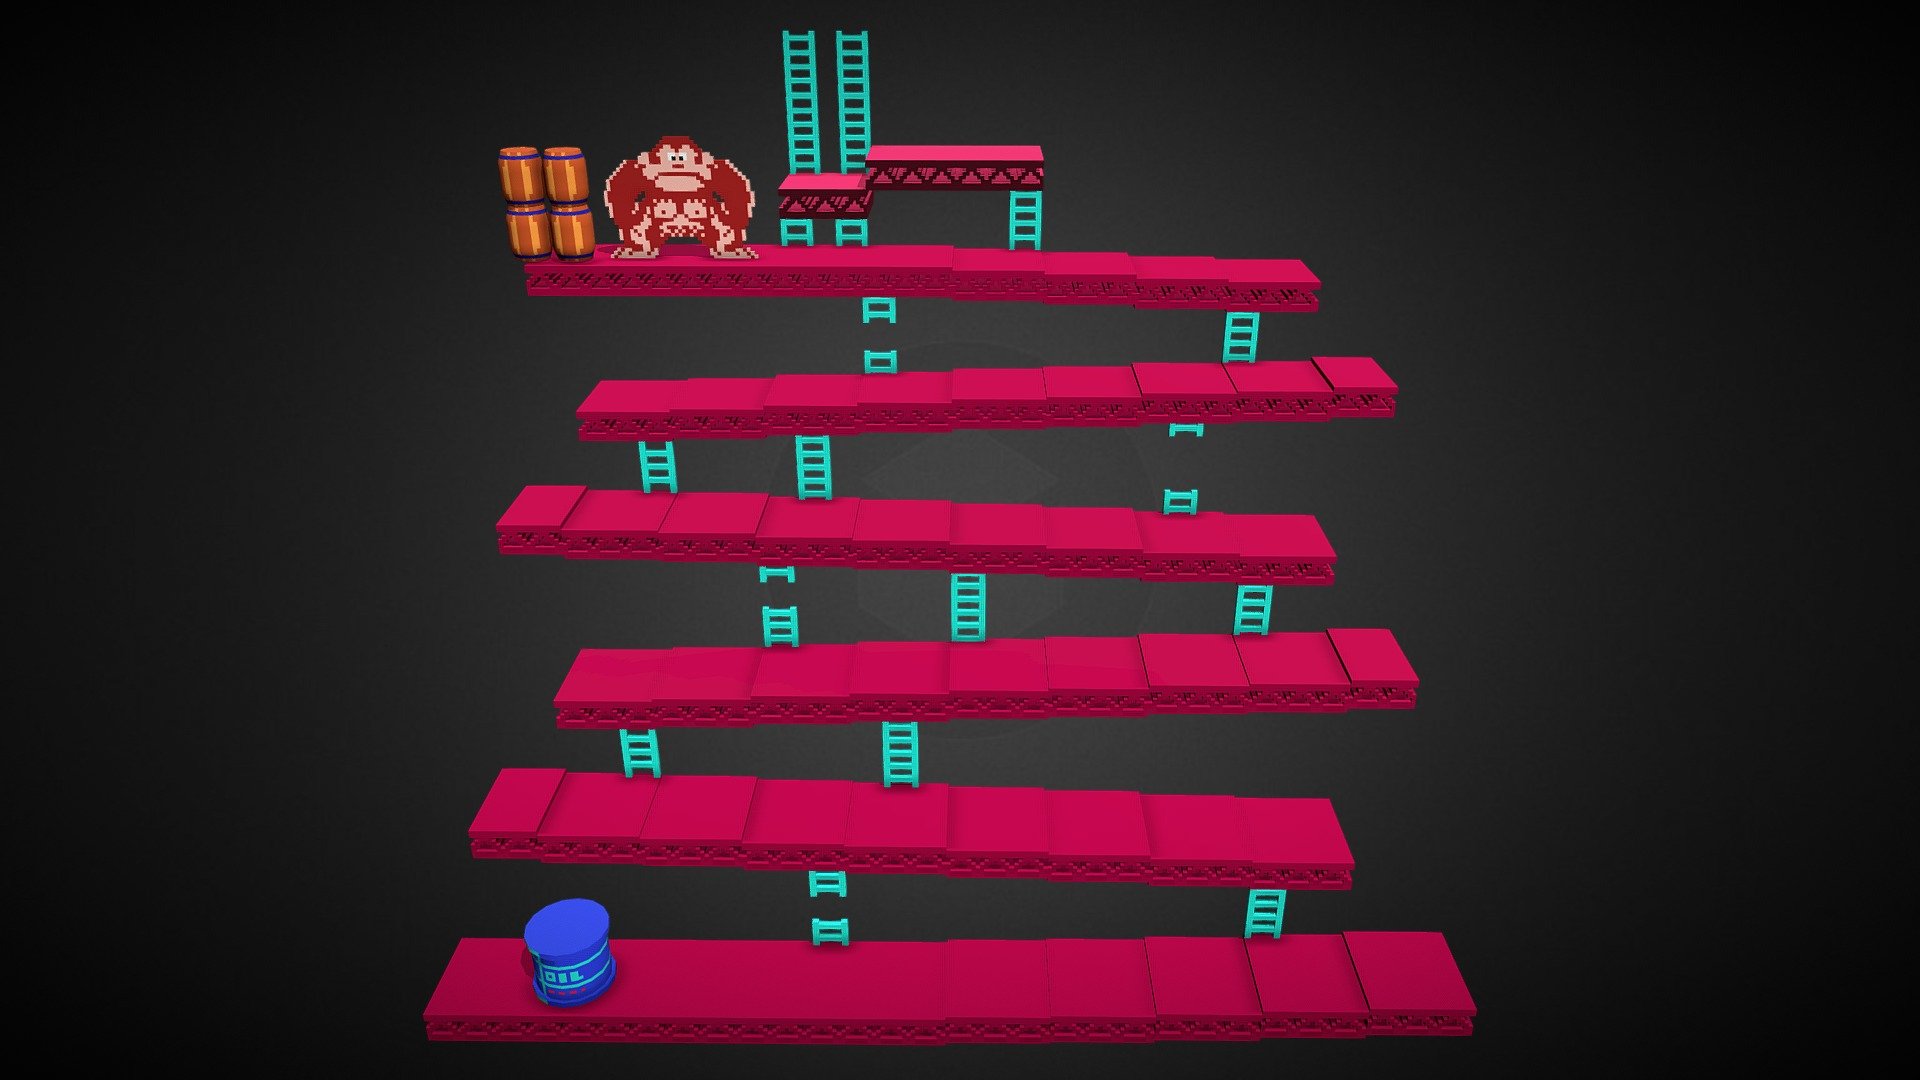 The classic Donkey Kong Level from the NES created in Softimage 2015 and Blender. Perfect as a in game prop or map 3d model